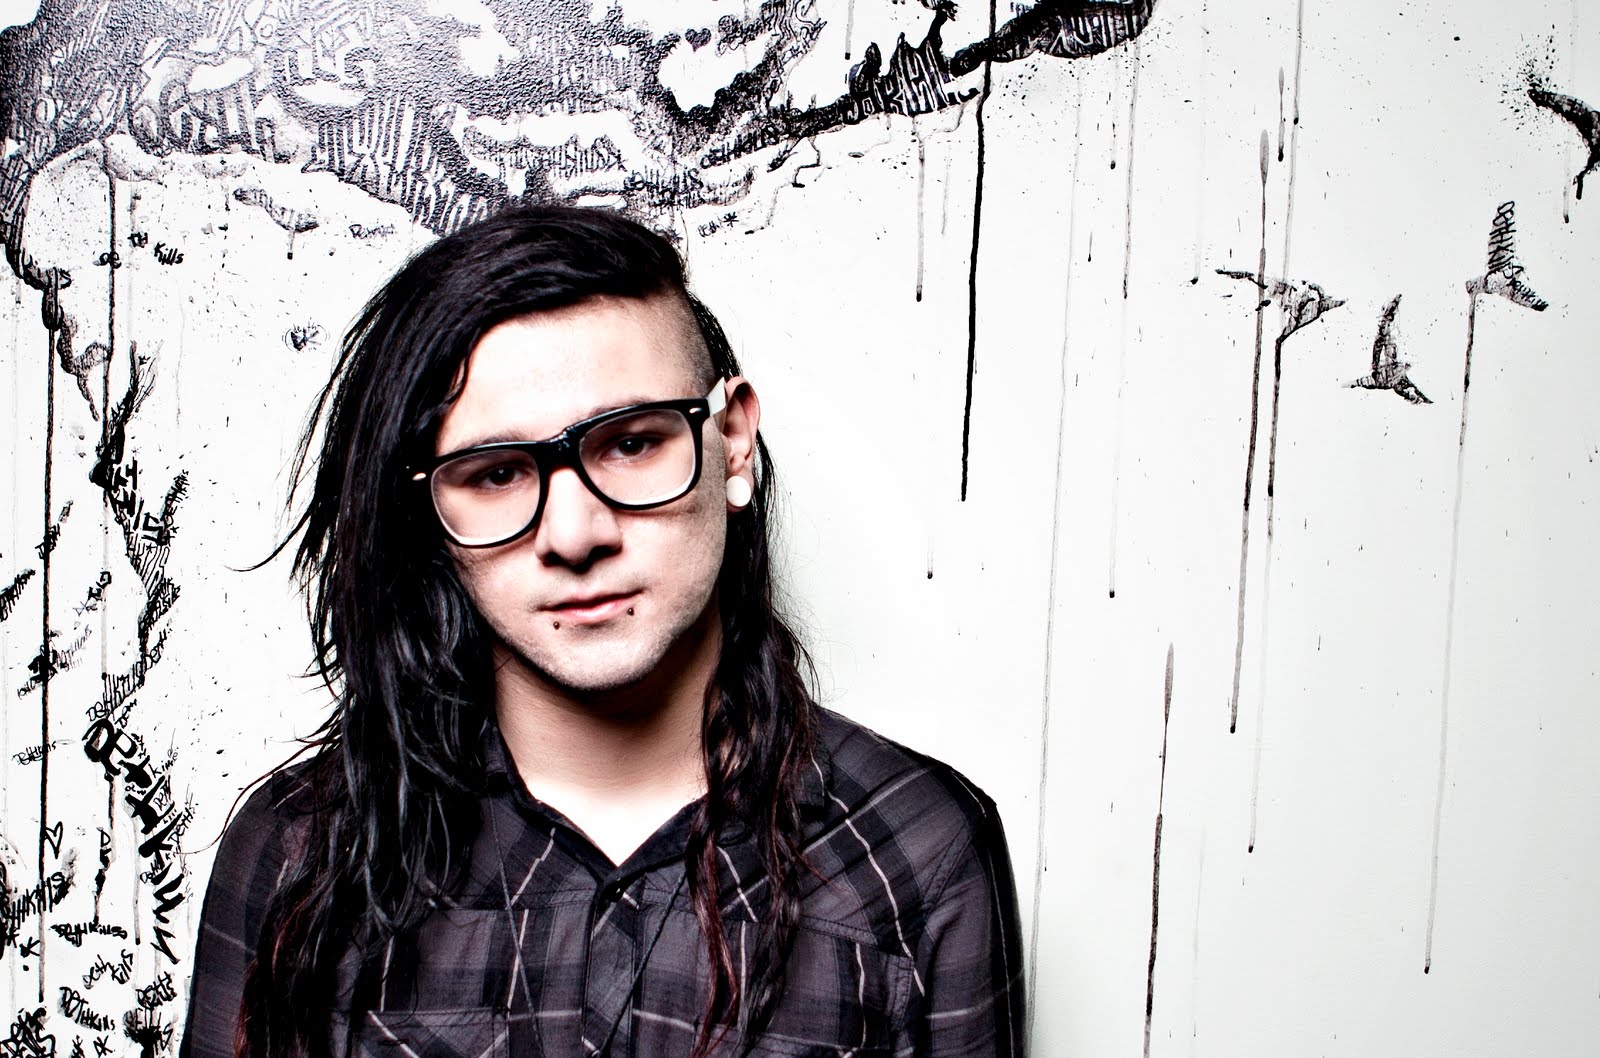 Watch Skrillex Get Knocked Out At Mexico Gig